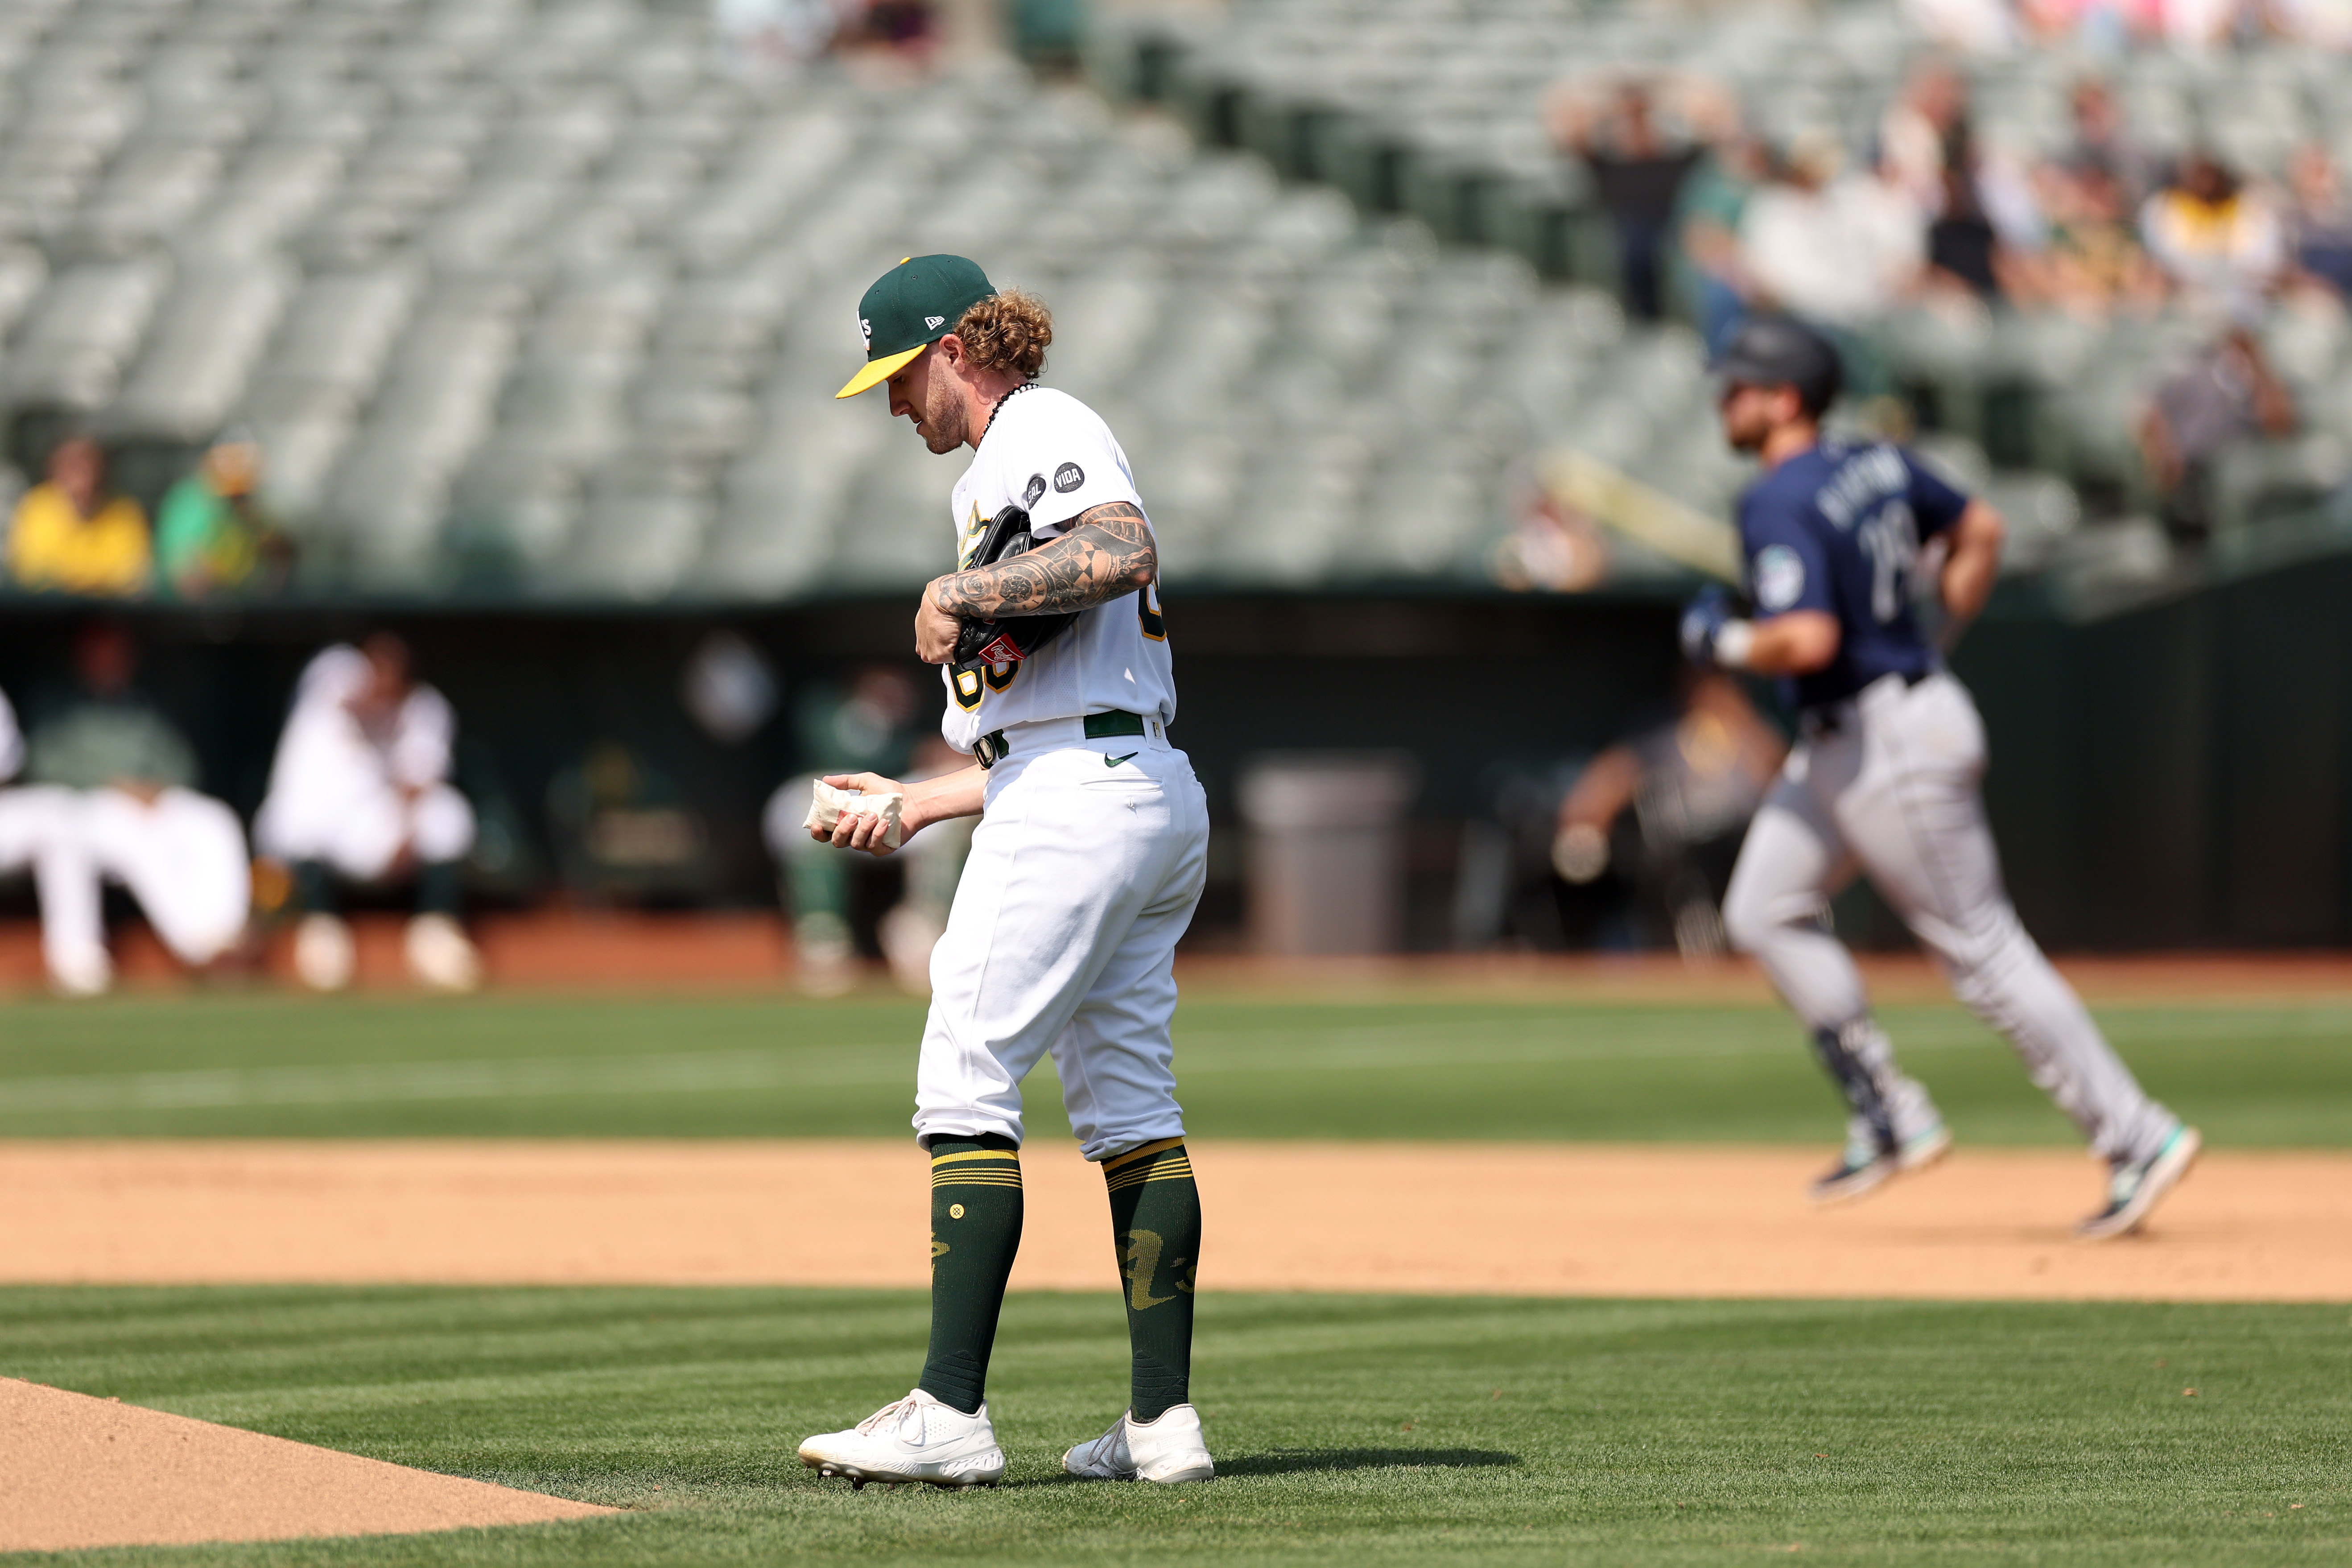 2023 Rival Preview: The Oakland A's have no interest in winning